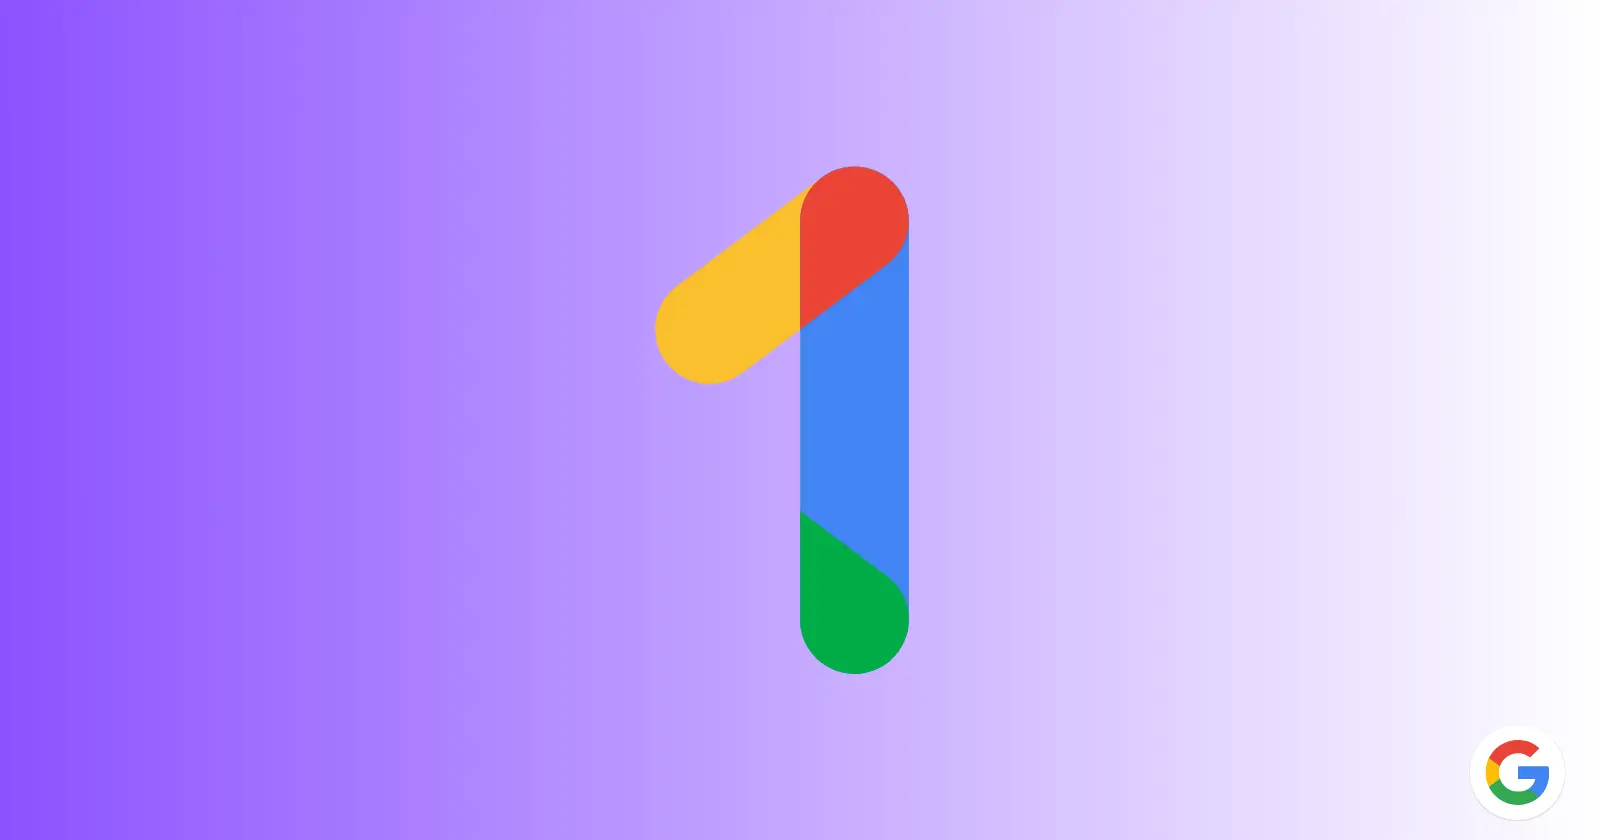 Google One is preparing a referral program that offers you 75% off the first three months